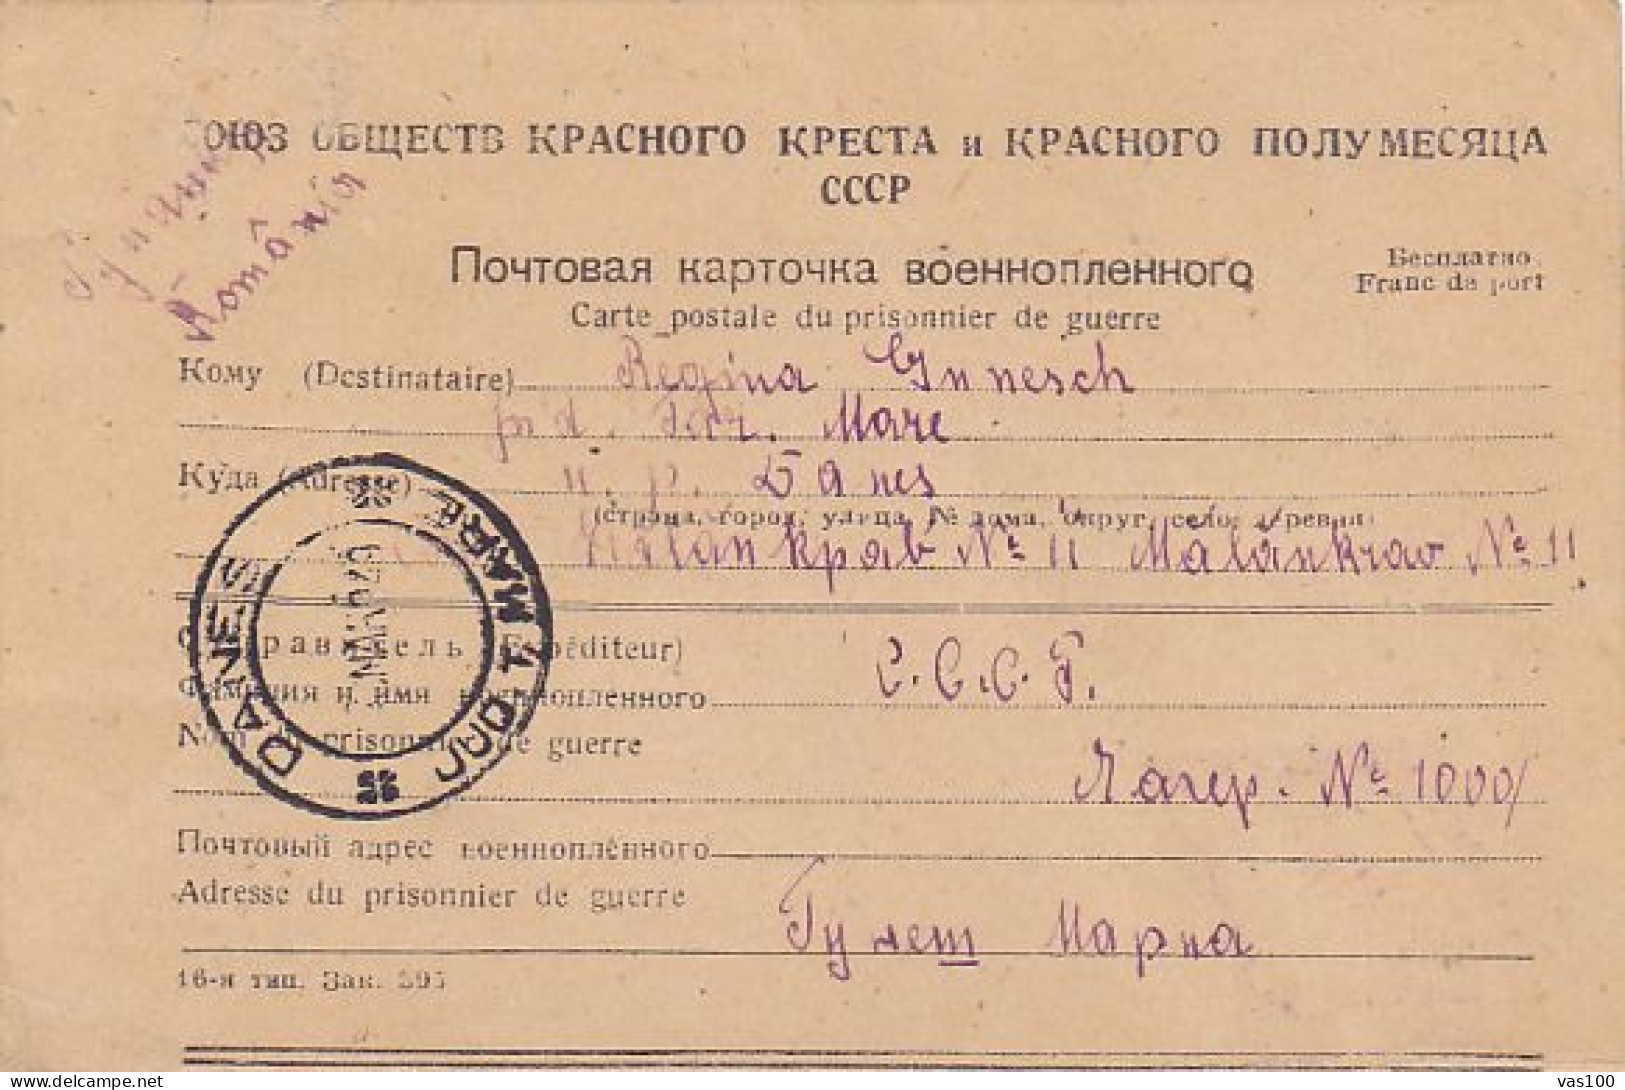 WW2, PRISONER OF WAR IN RUSSIA POSTCARD, 1949, HUNGARY - Covers & Documents